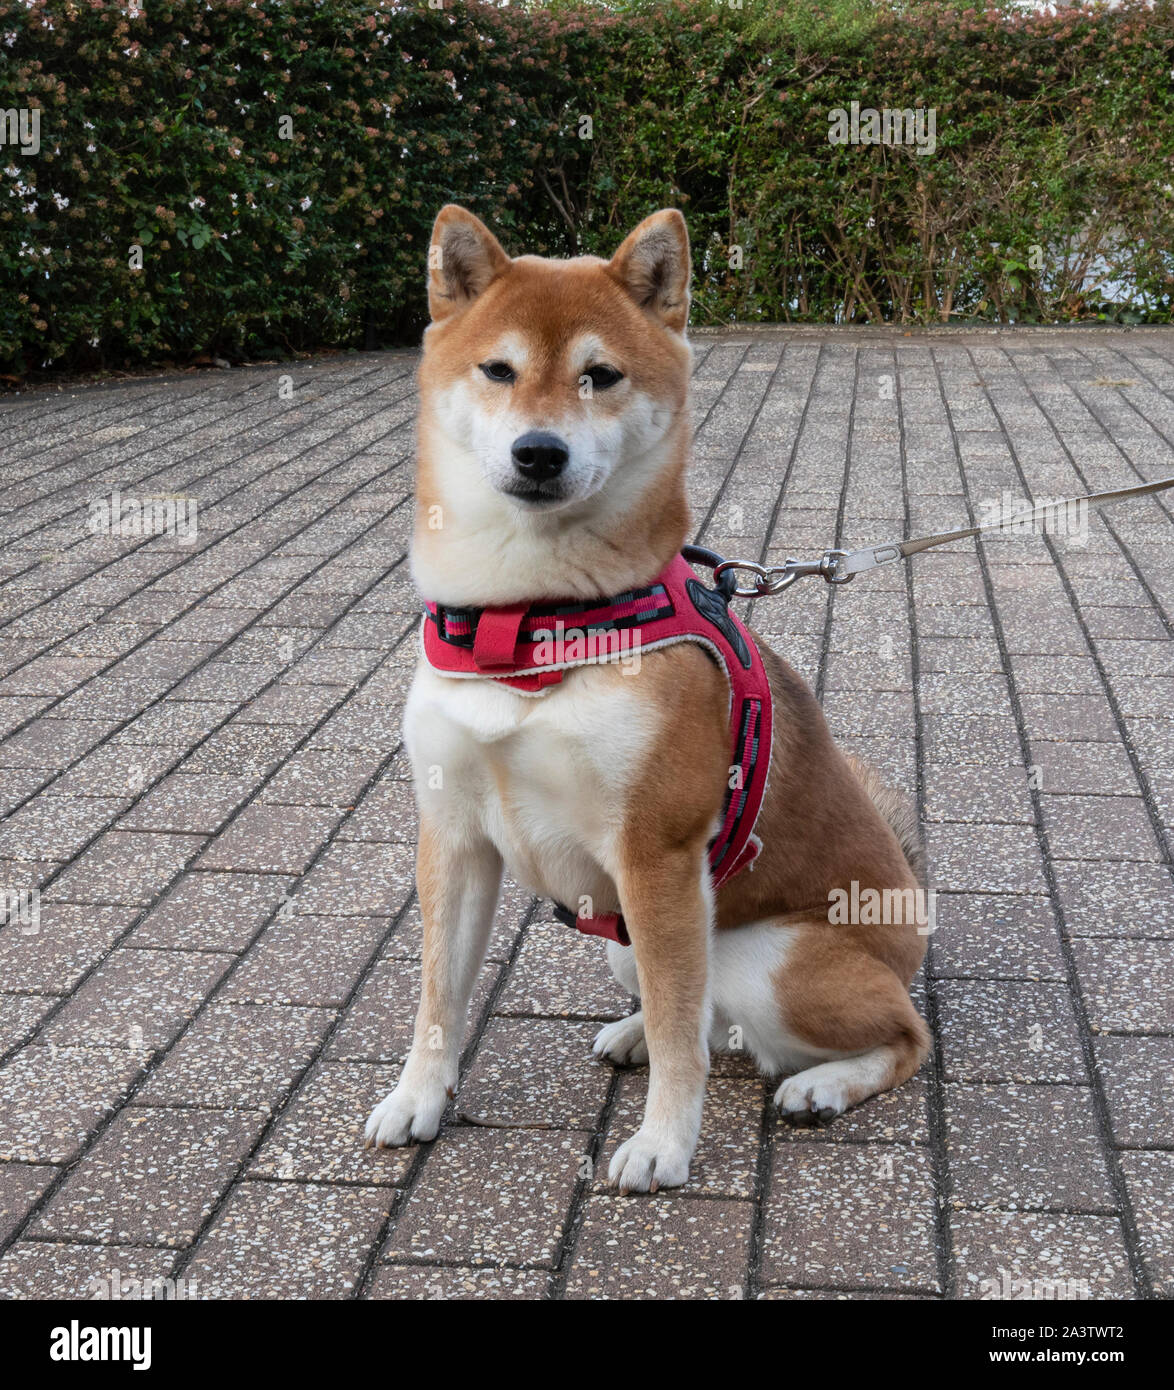 Tokyo, Japan - october 31st, 2018:A japanese Akita dog sitting obediently in a Tokyo street. Stock Photo